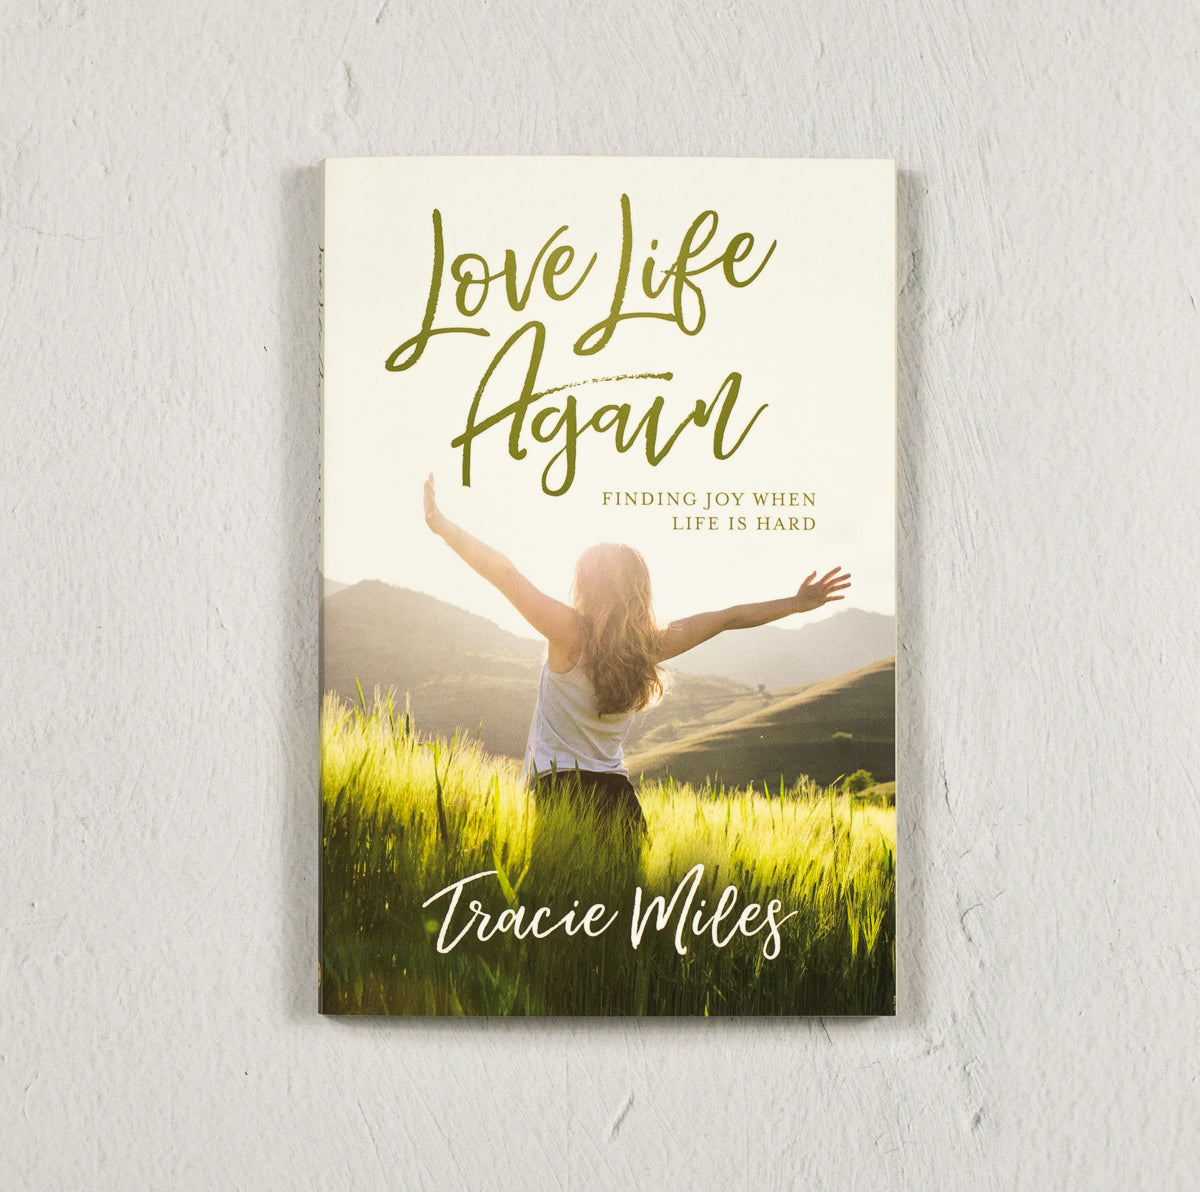 Love Life Again: Finding Joy When Life is Hard by Tracie Miles